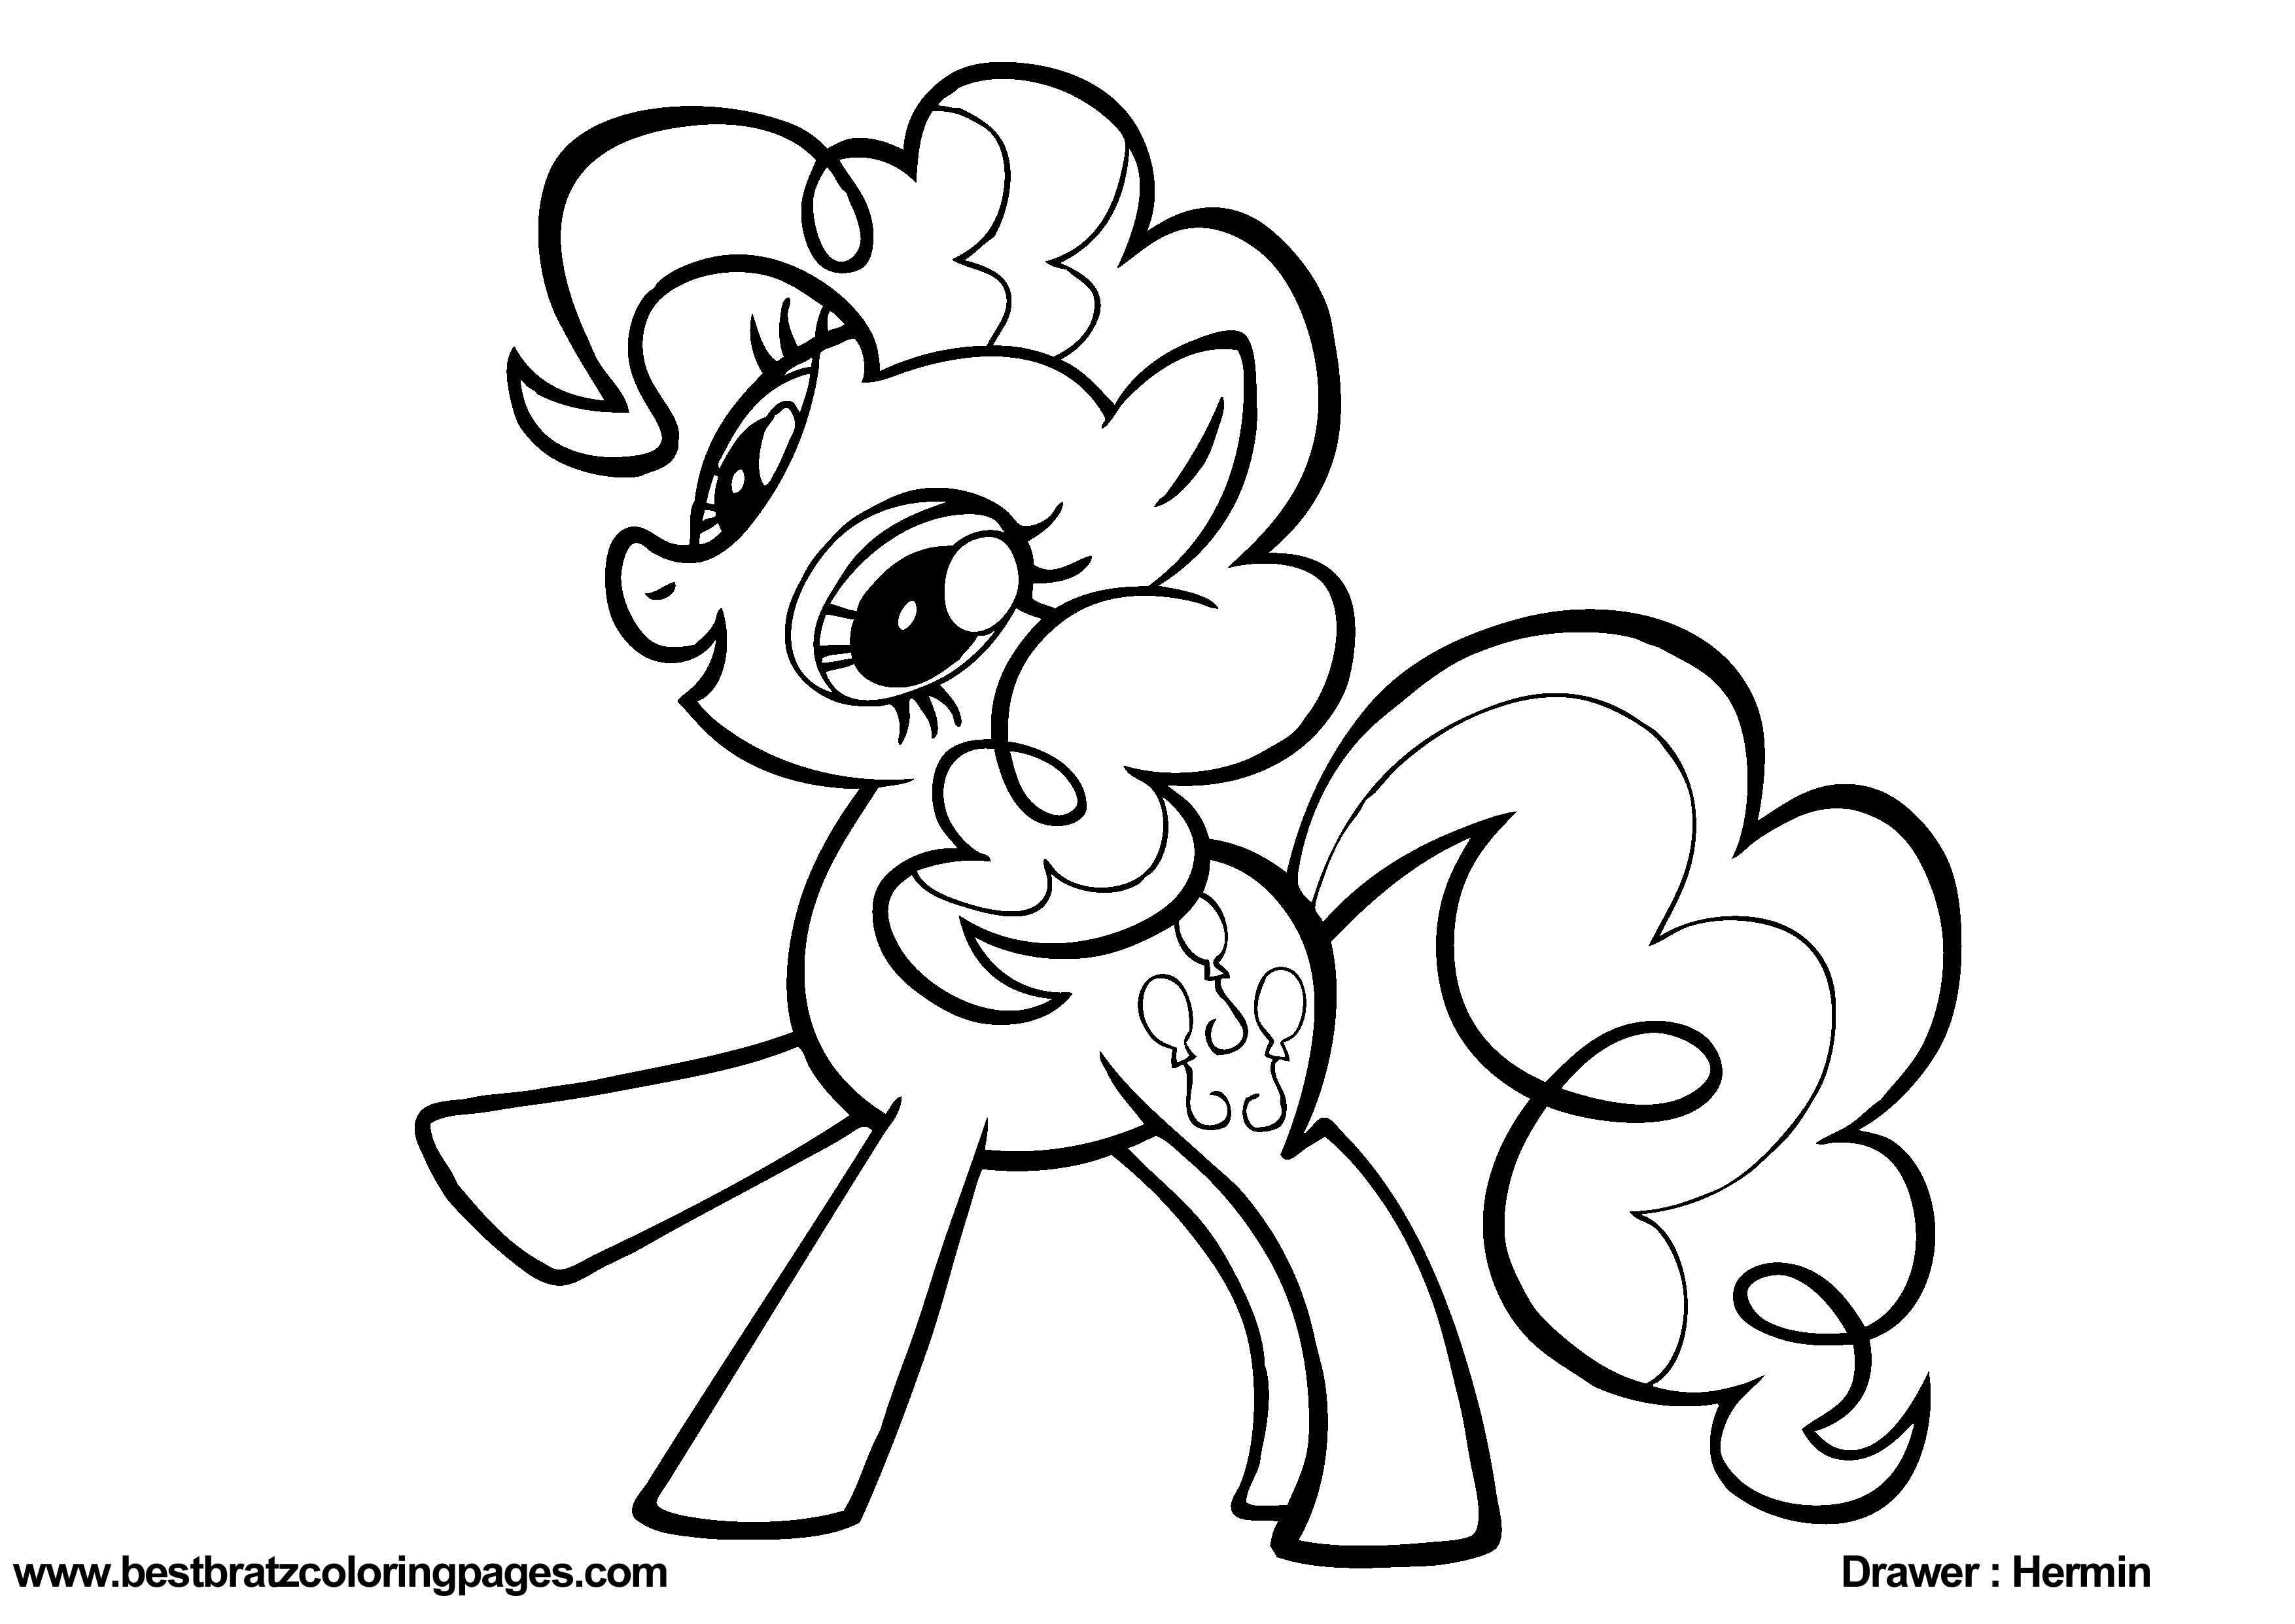 My Little Pony Friendship Is Magic Ausmalbilder
 My Little Pony Friendship Is Magic Coloring Page Coloring